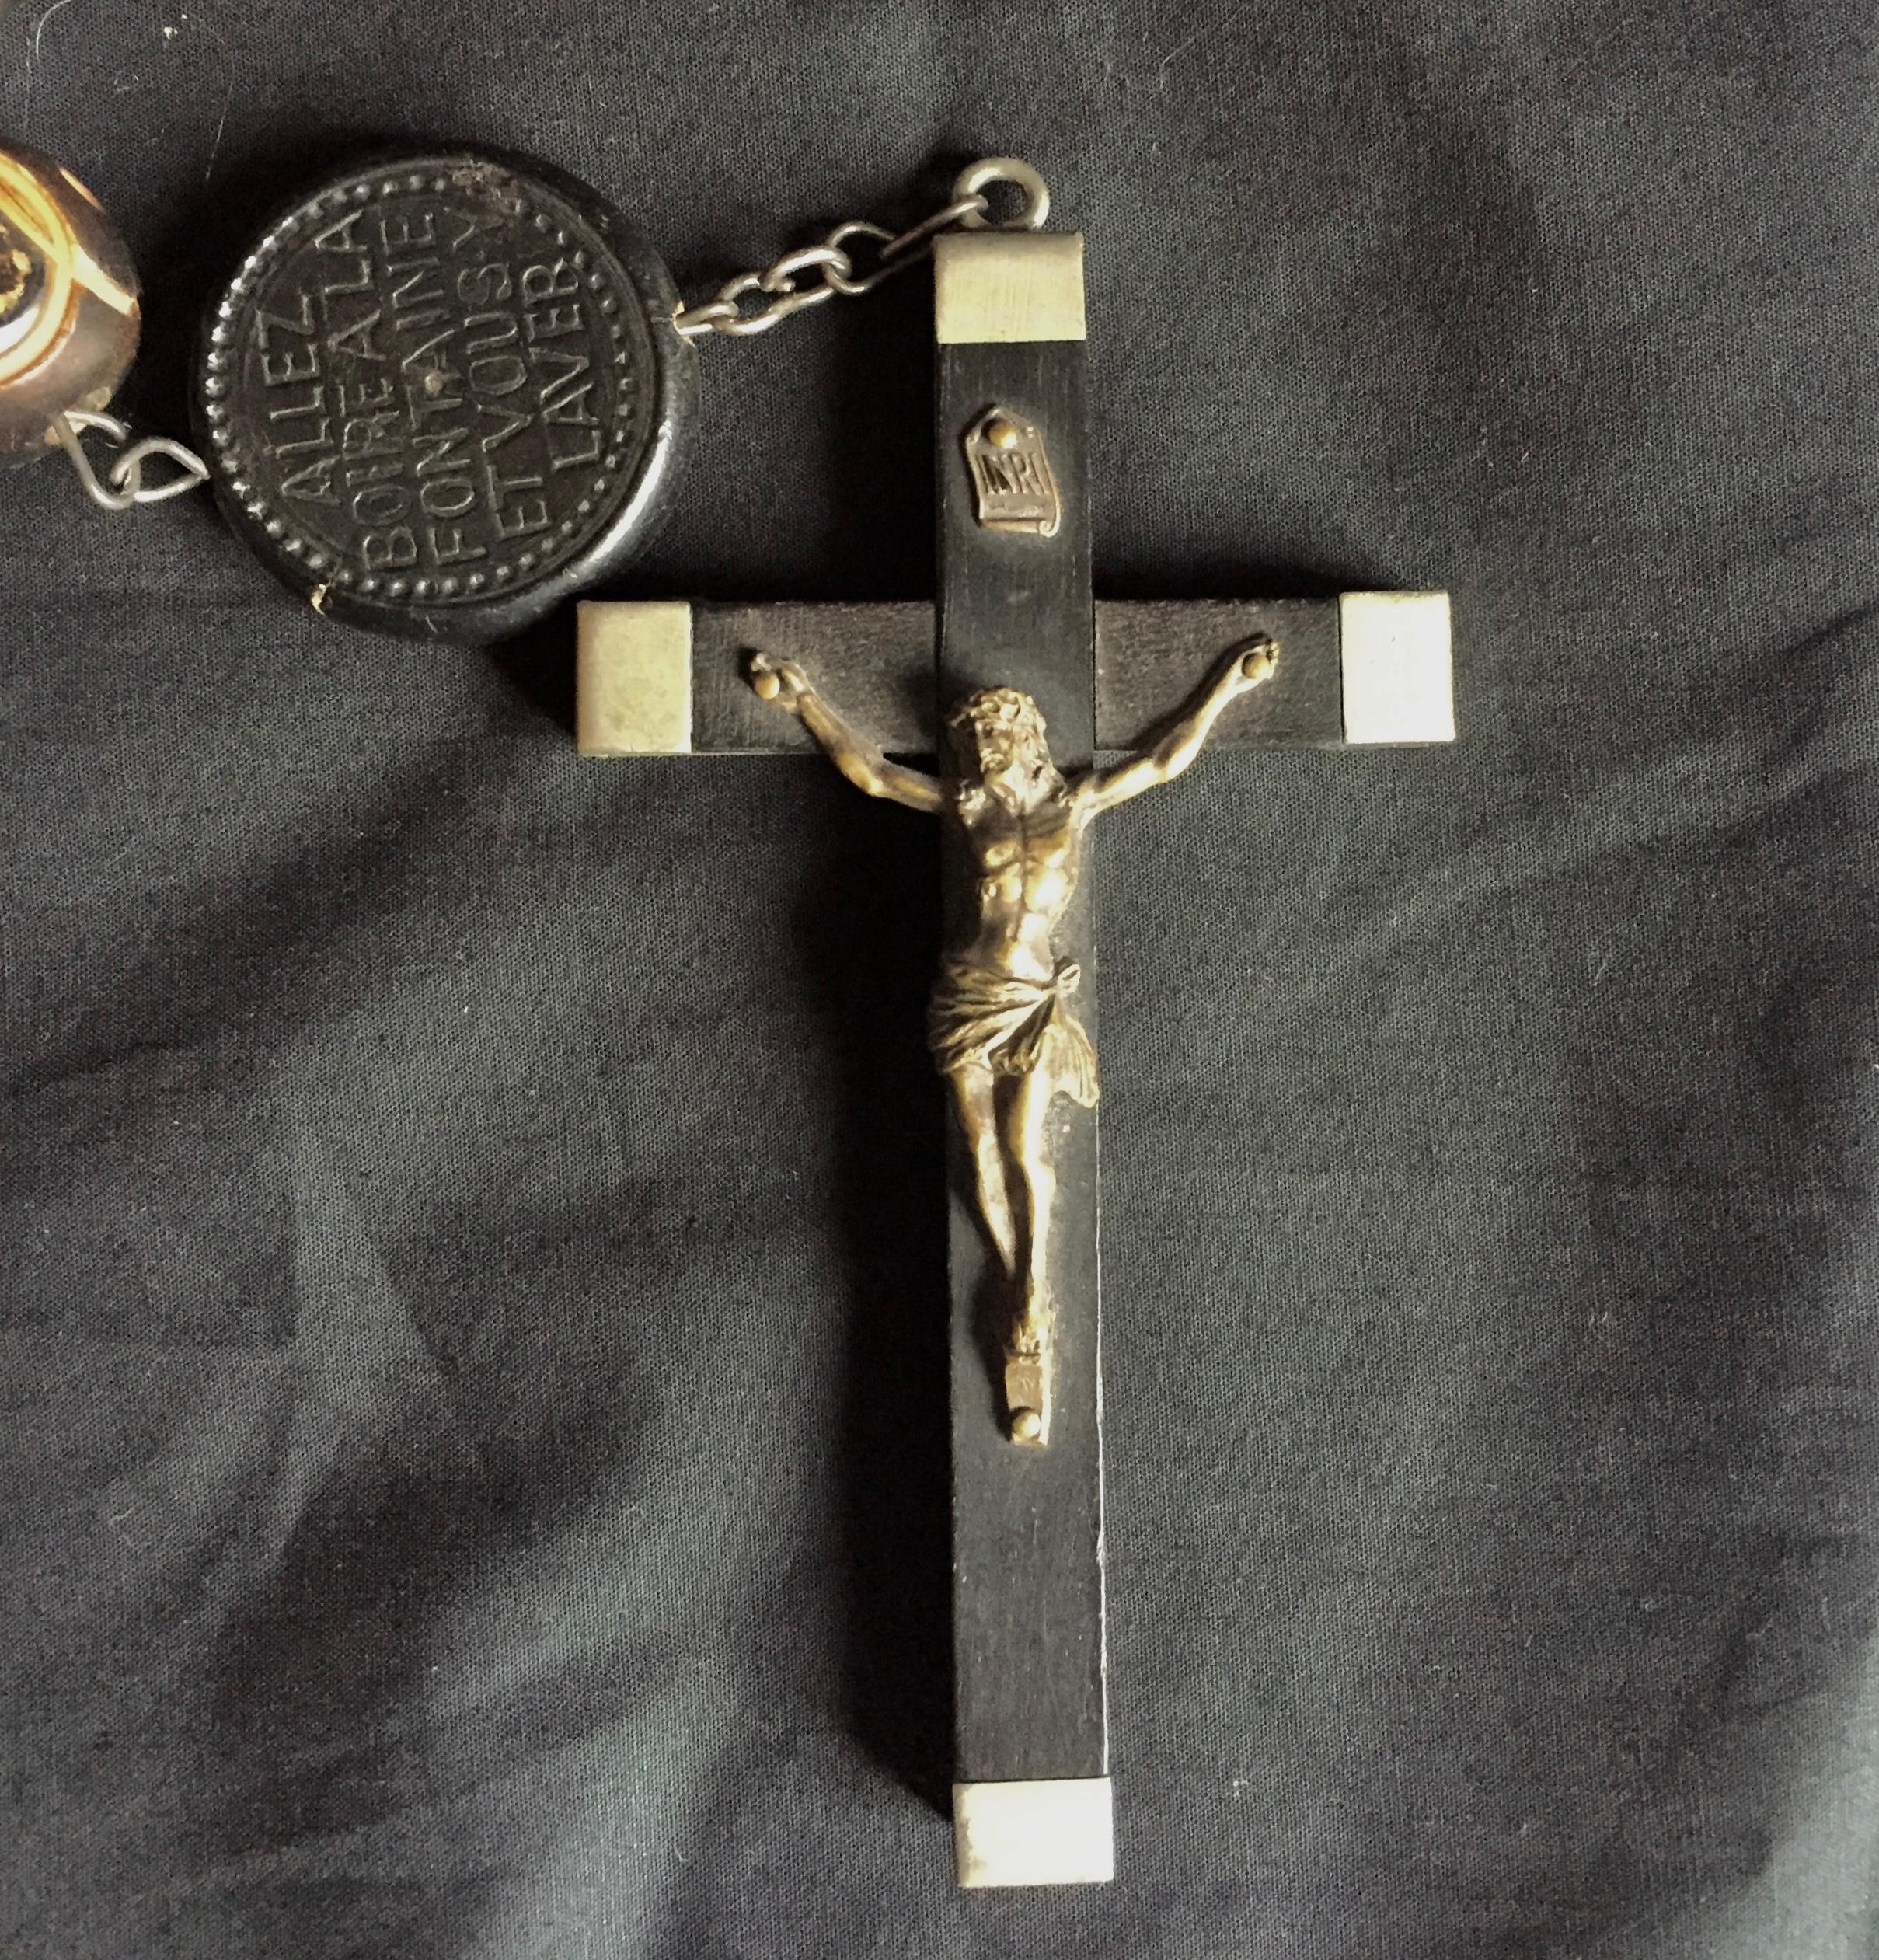 Vintage French rosary, called a nuns rosary or monks rosary because of its length and size of the beads, circa 1940. The French rosary can be worn around the neck (tripled) or waist and can also be hung on the wall. The large ebony wood crucifix in